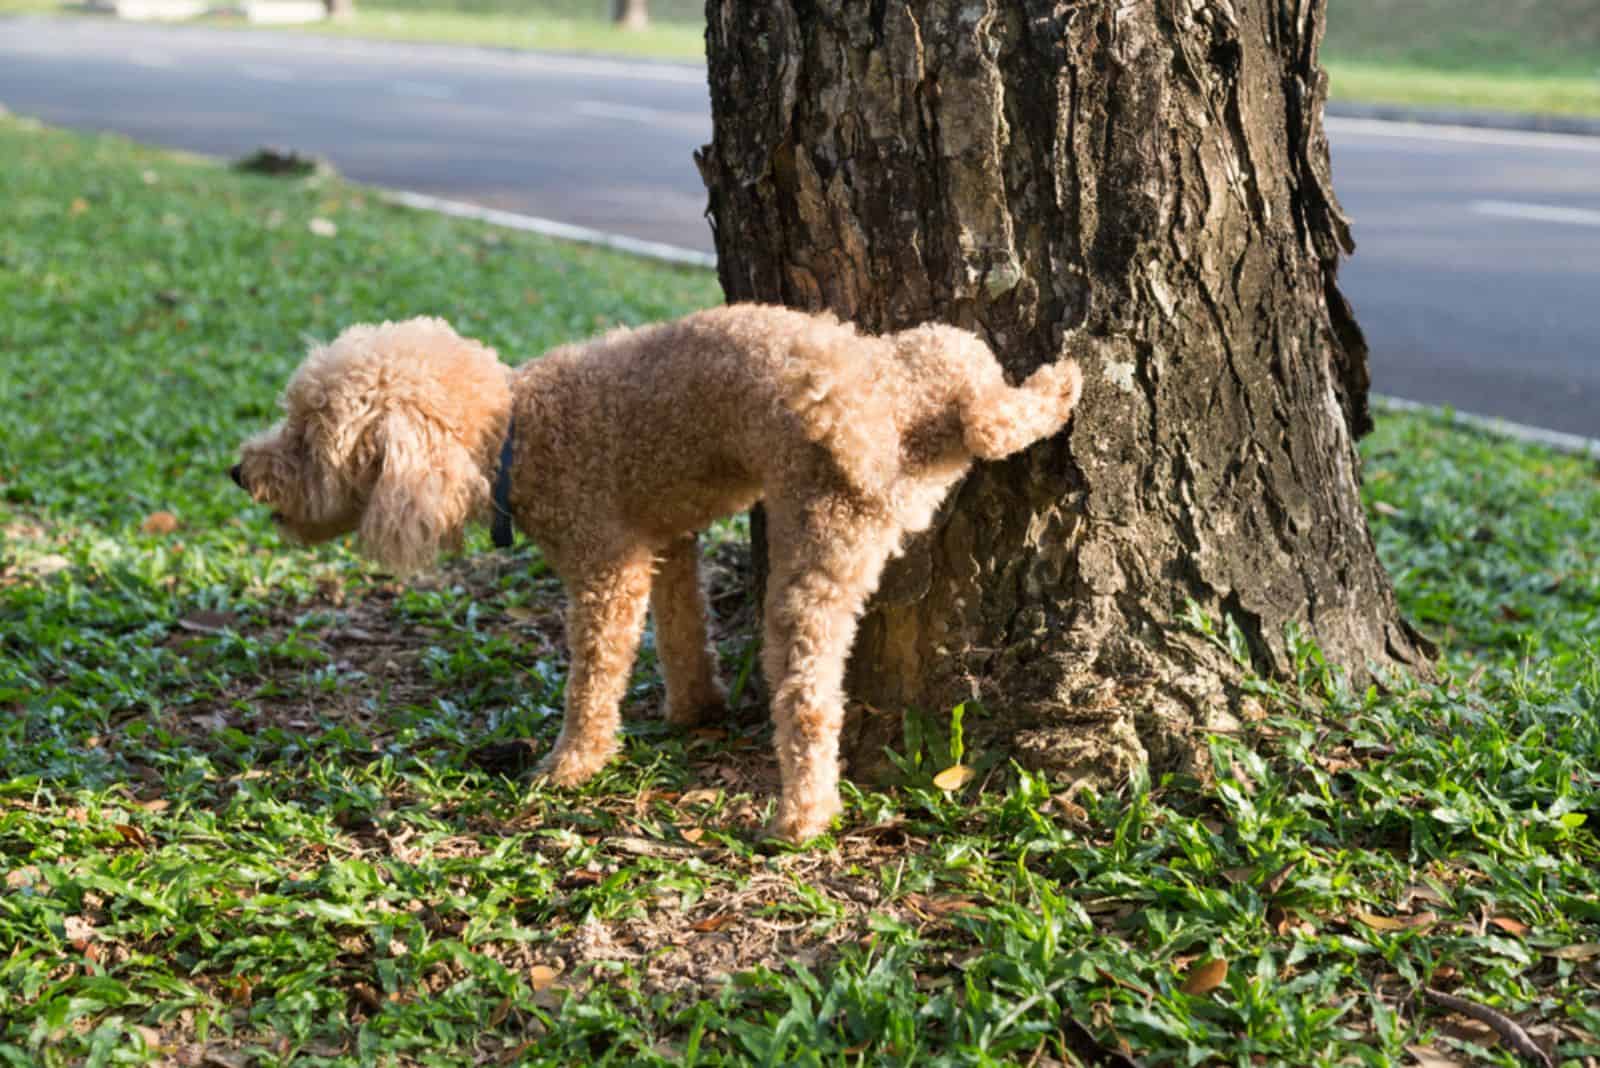 poodle urinating pee on tree trunk in the park